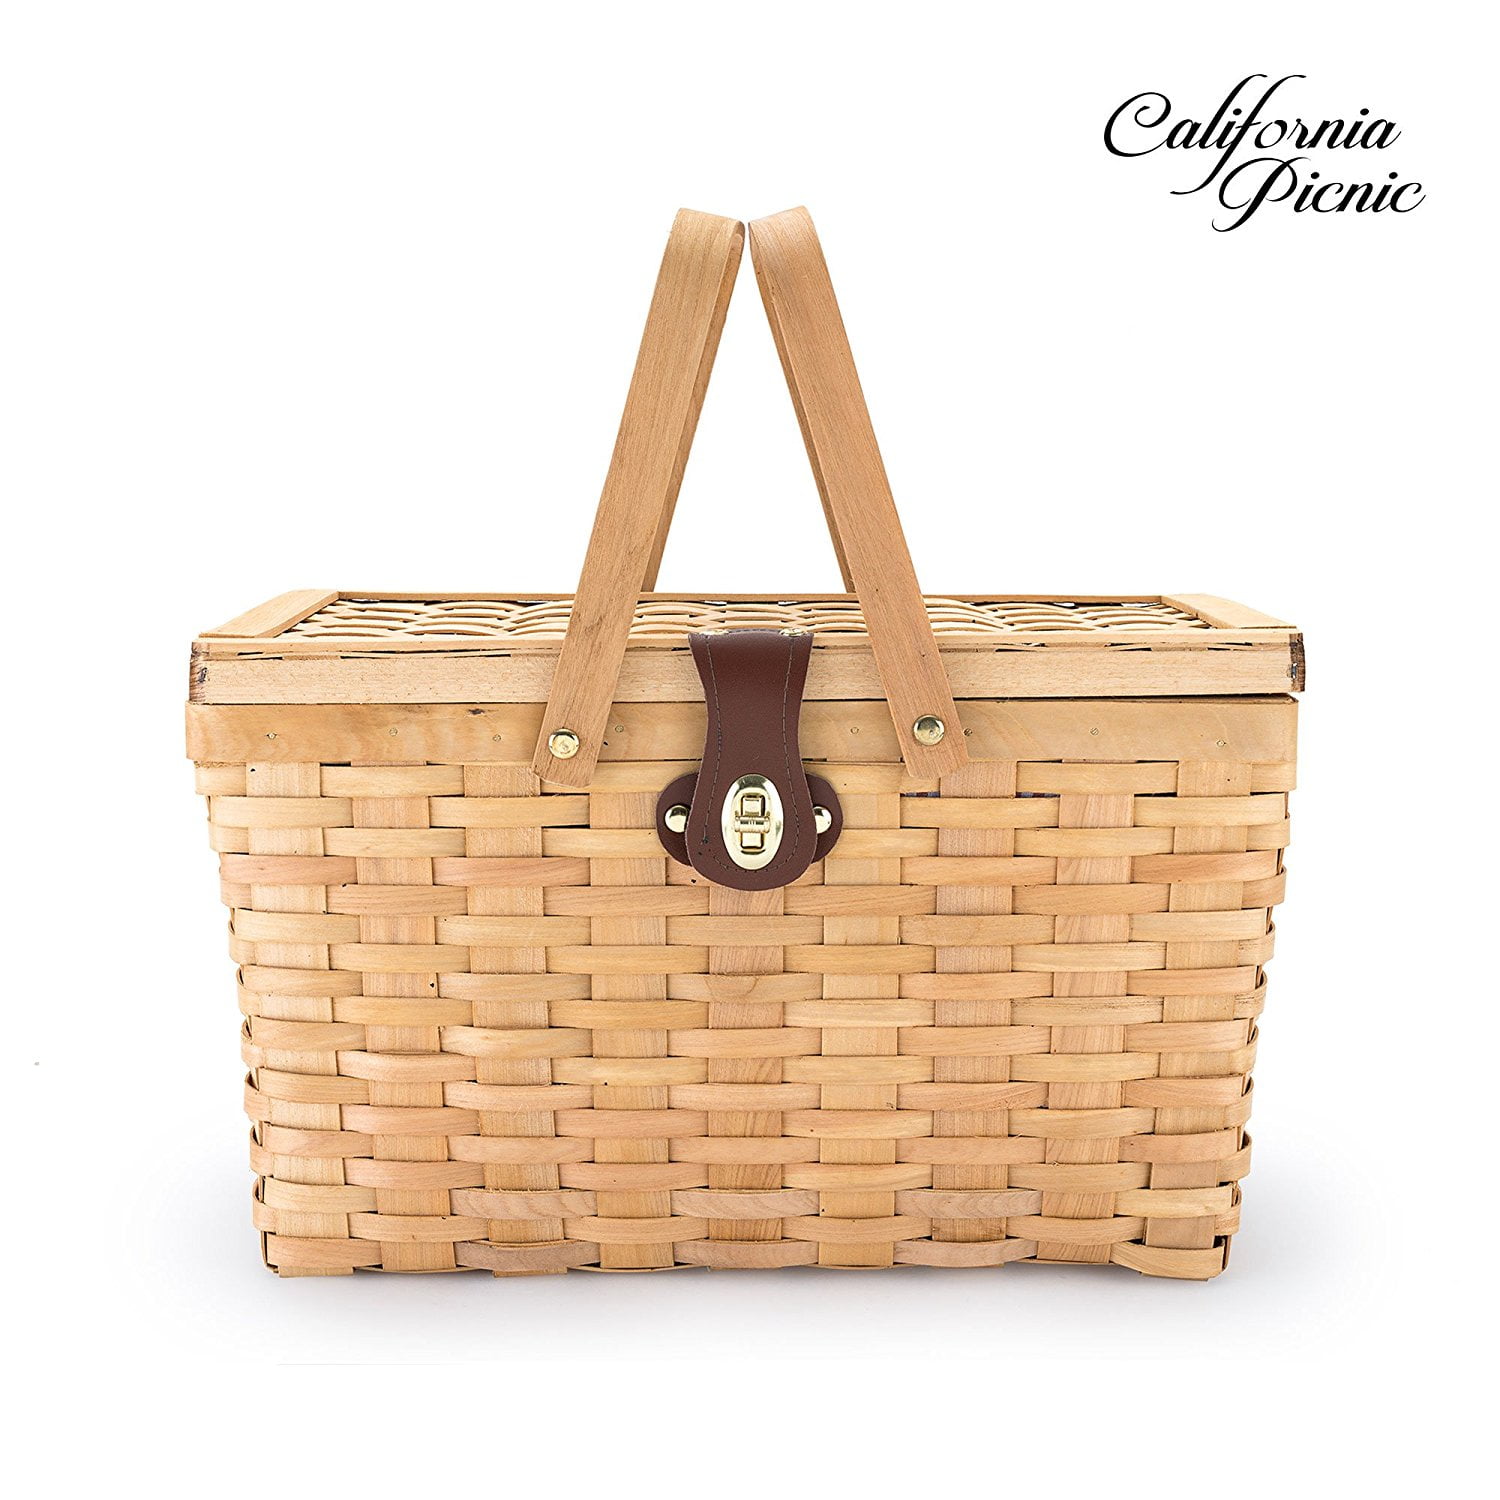 9 Gallon Waterproof Picnic Basket with Carry Handle, Large